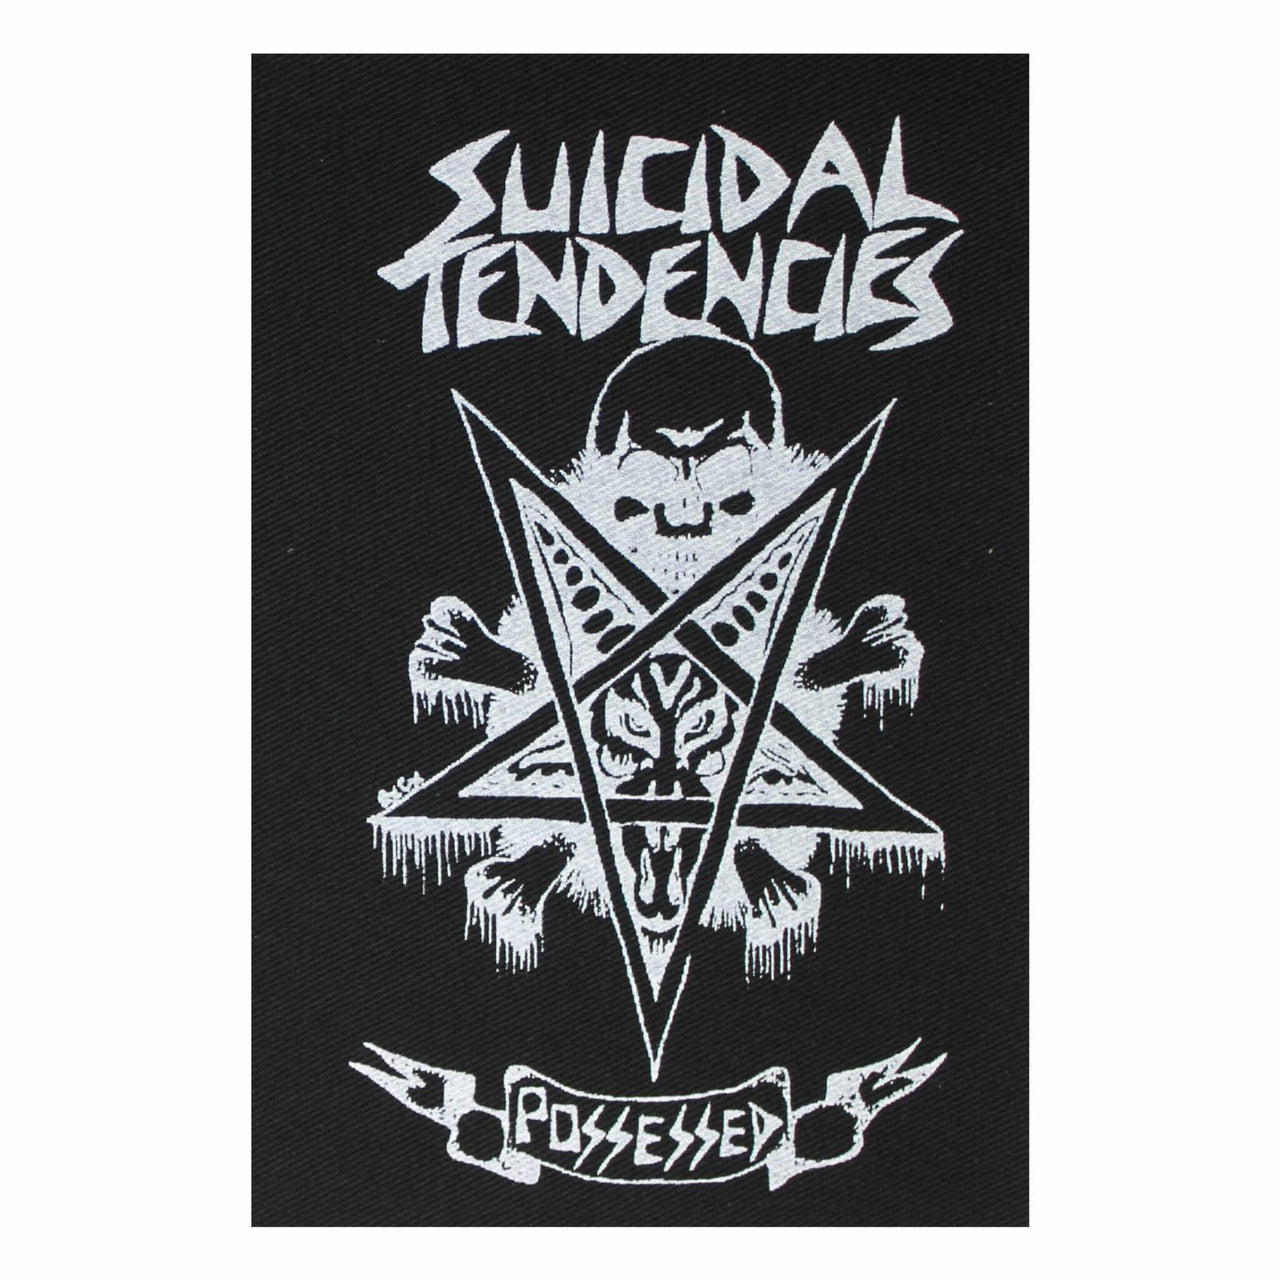 Suicidal Tendencies Possessed Cloth Patch